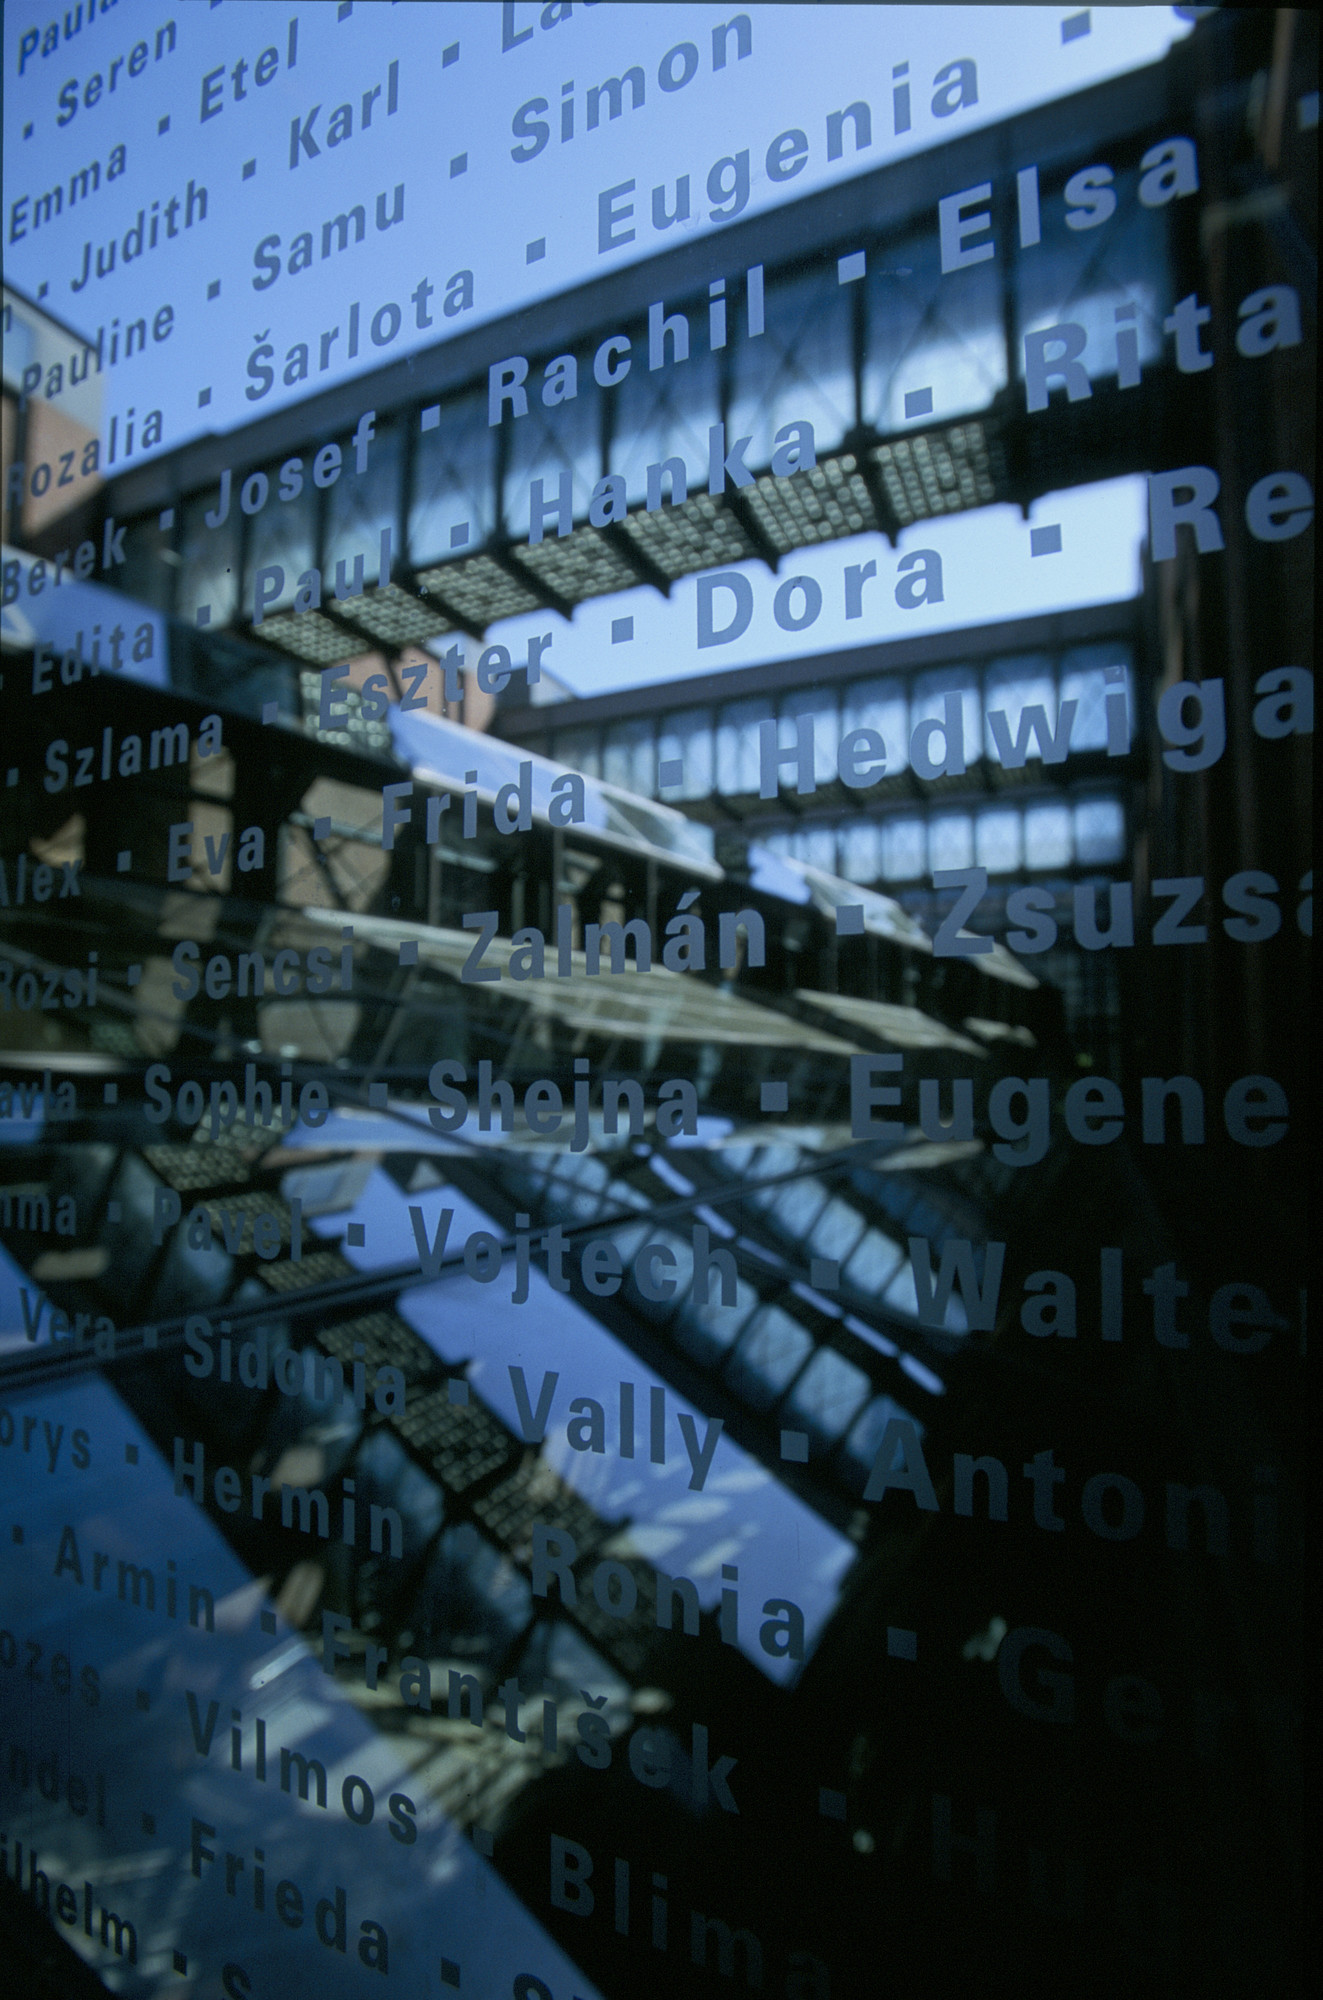 One panel of the glass etched with the first names of Holocaust victims that lines the bridge in the permanent exhibition of the U.S. Holocaust Memorial Museum.